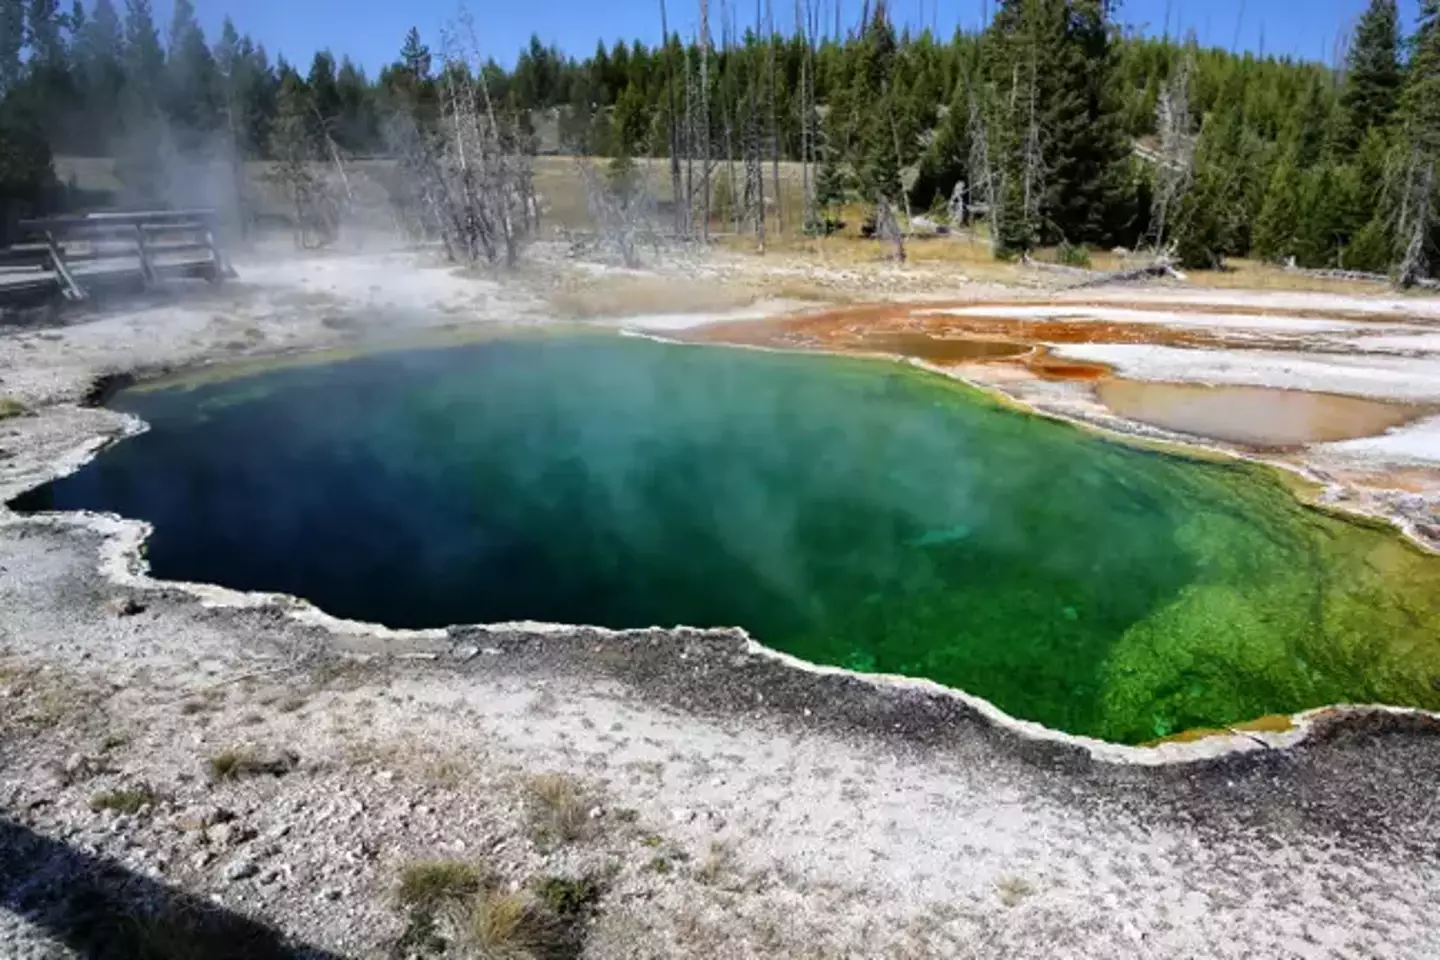 Yellowstone National Park, looks great but might have a slight issue with you getting murdered.